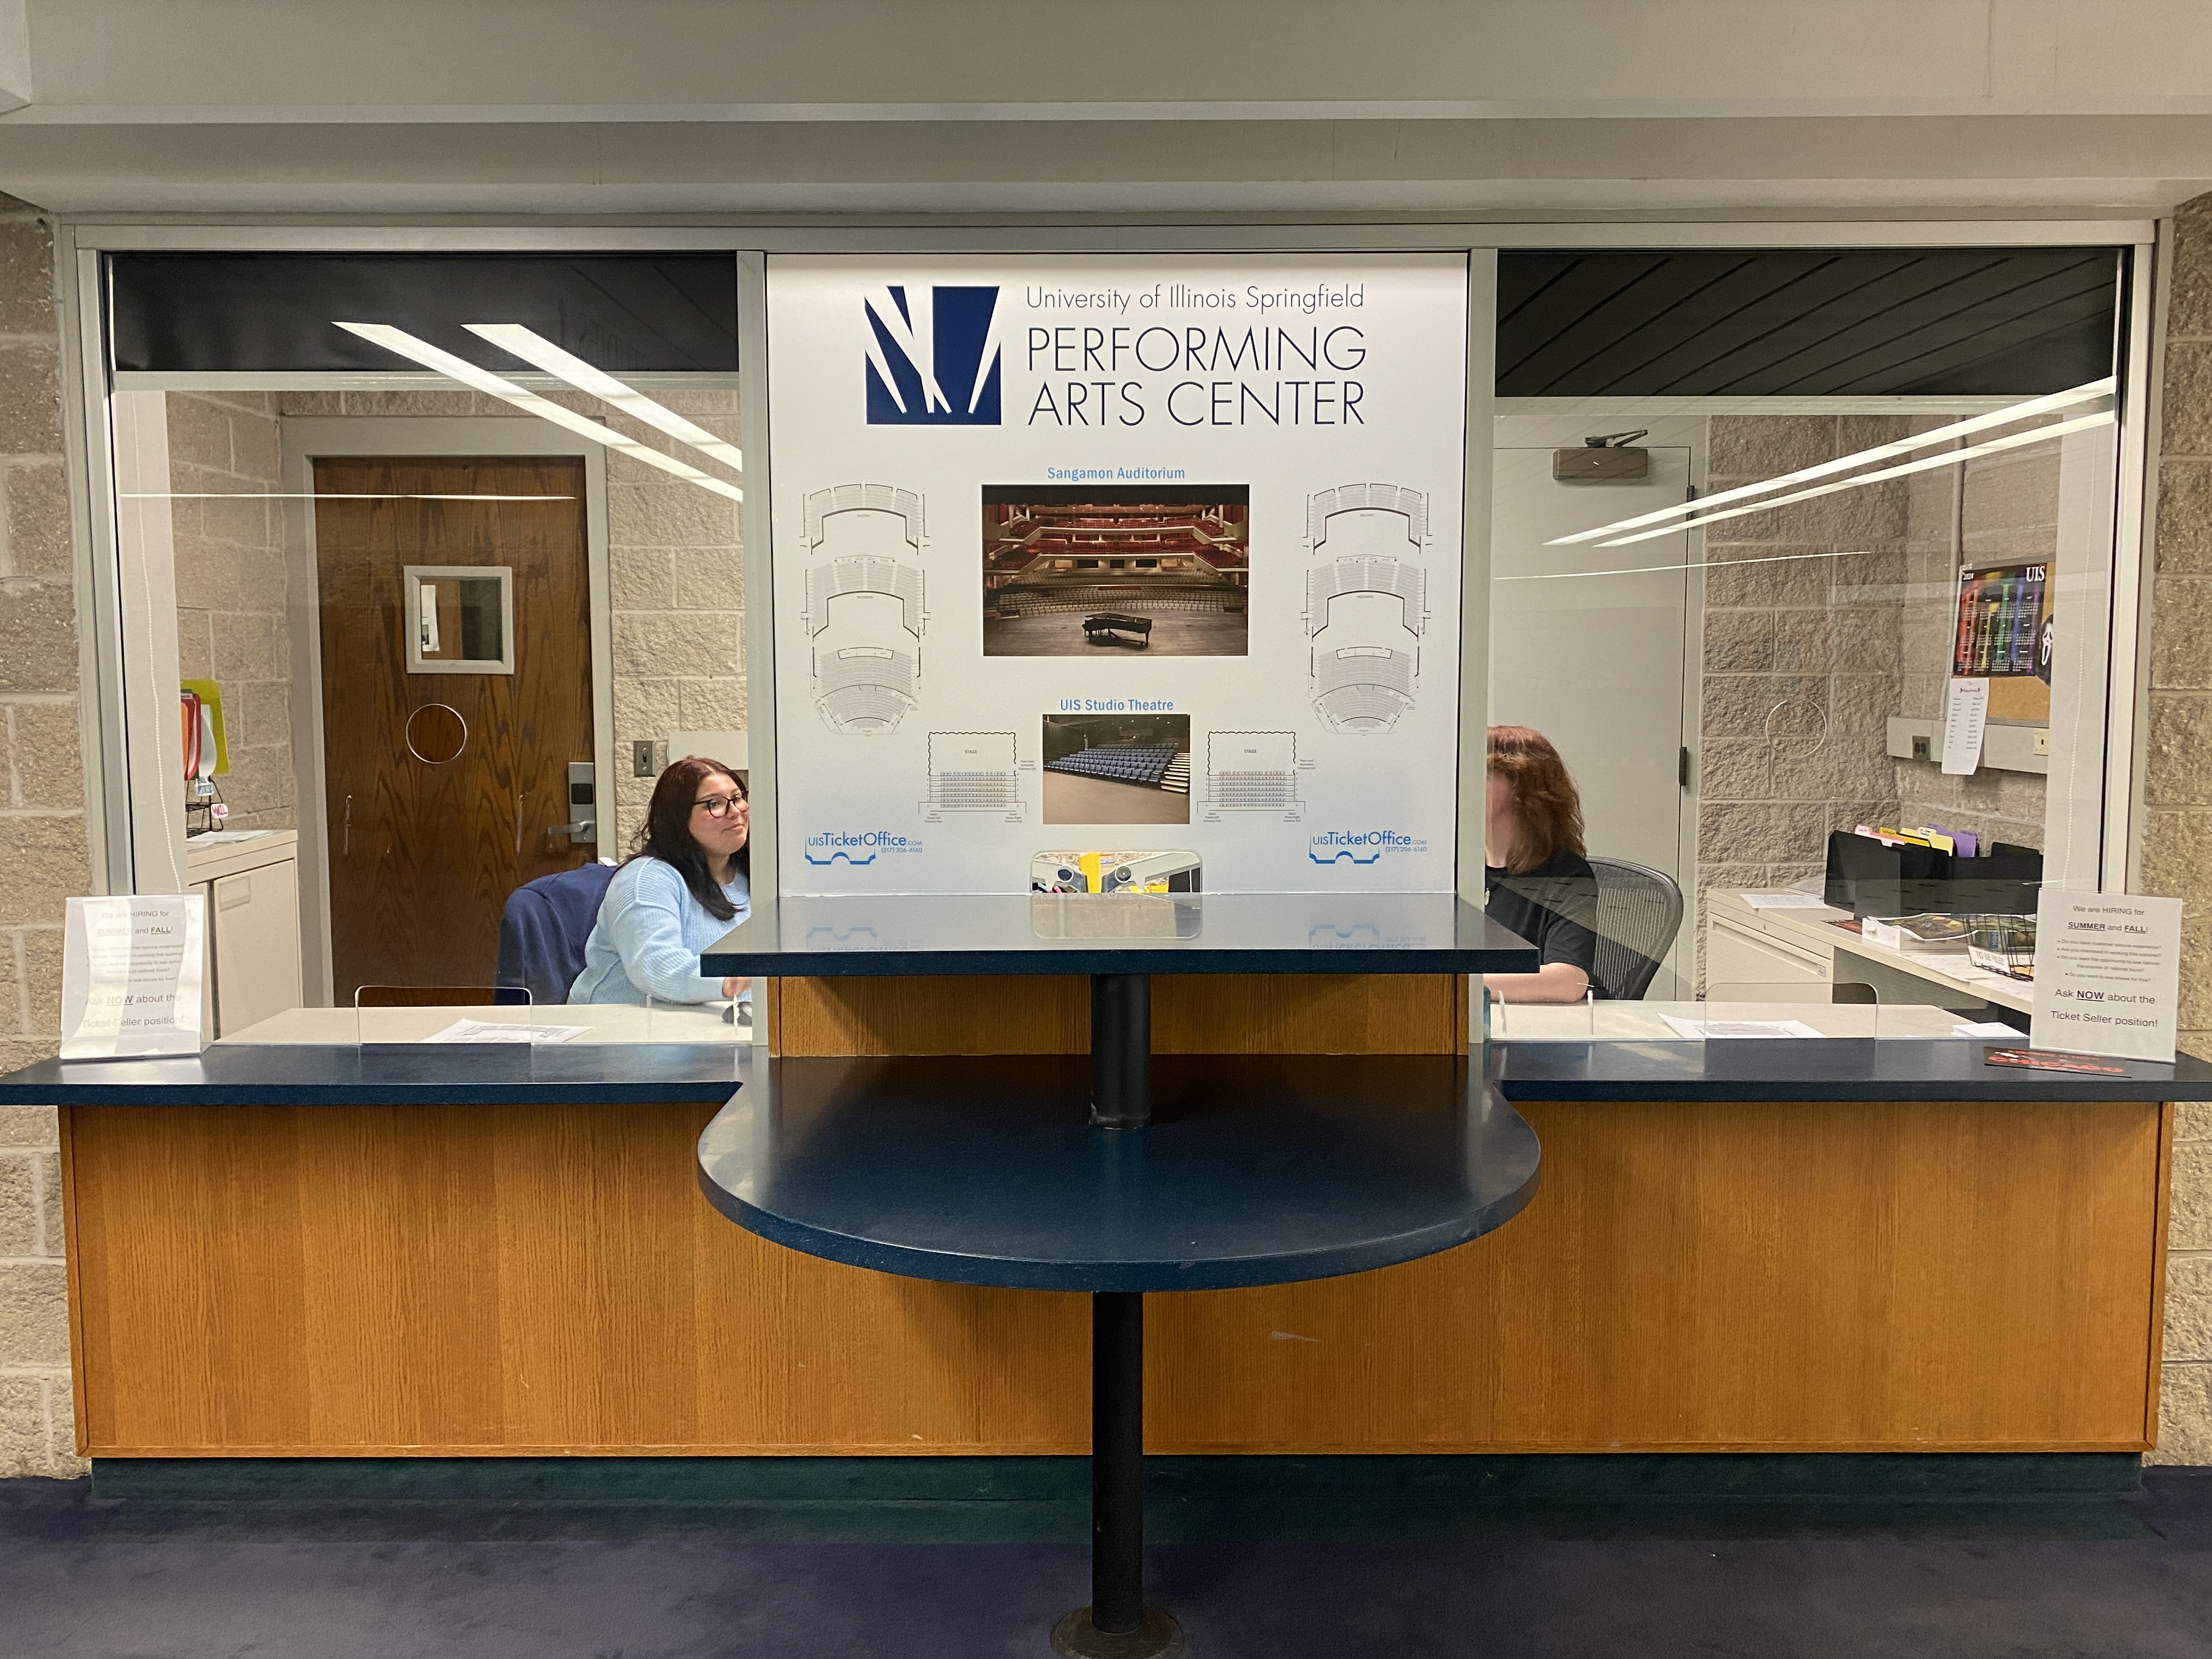 Ticket counter at the University of Illinois Springfield Performing Arts Center with two staff members.